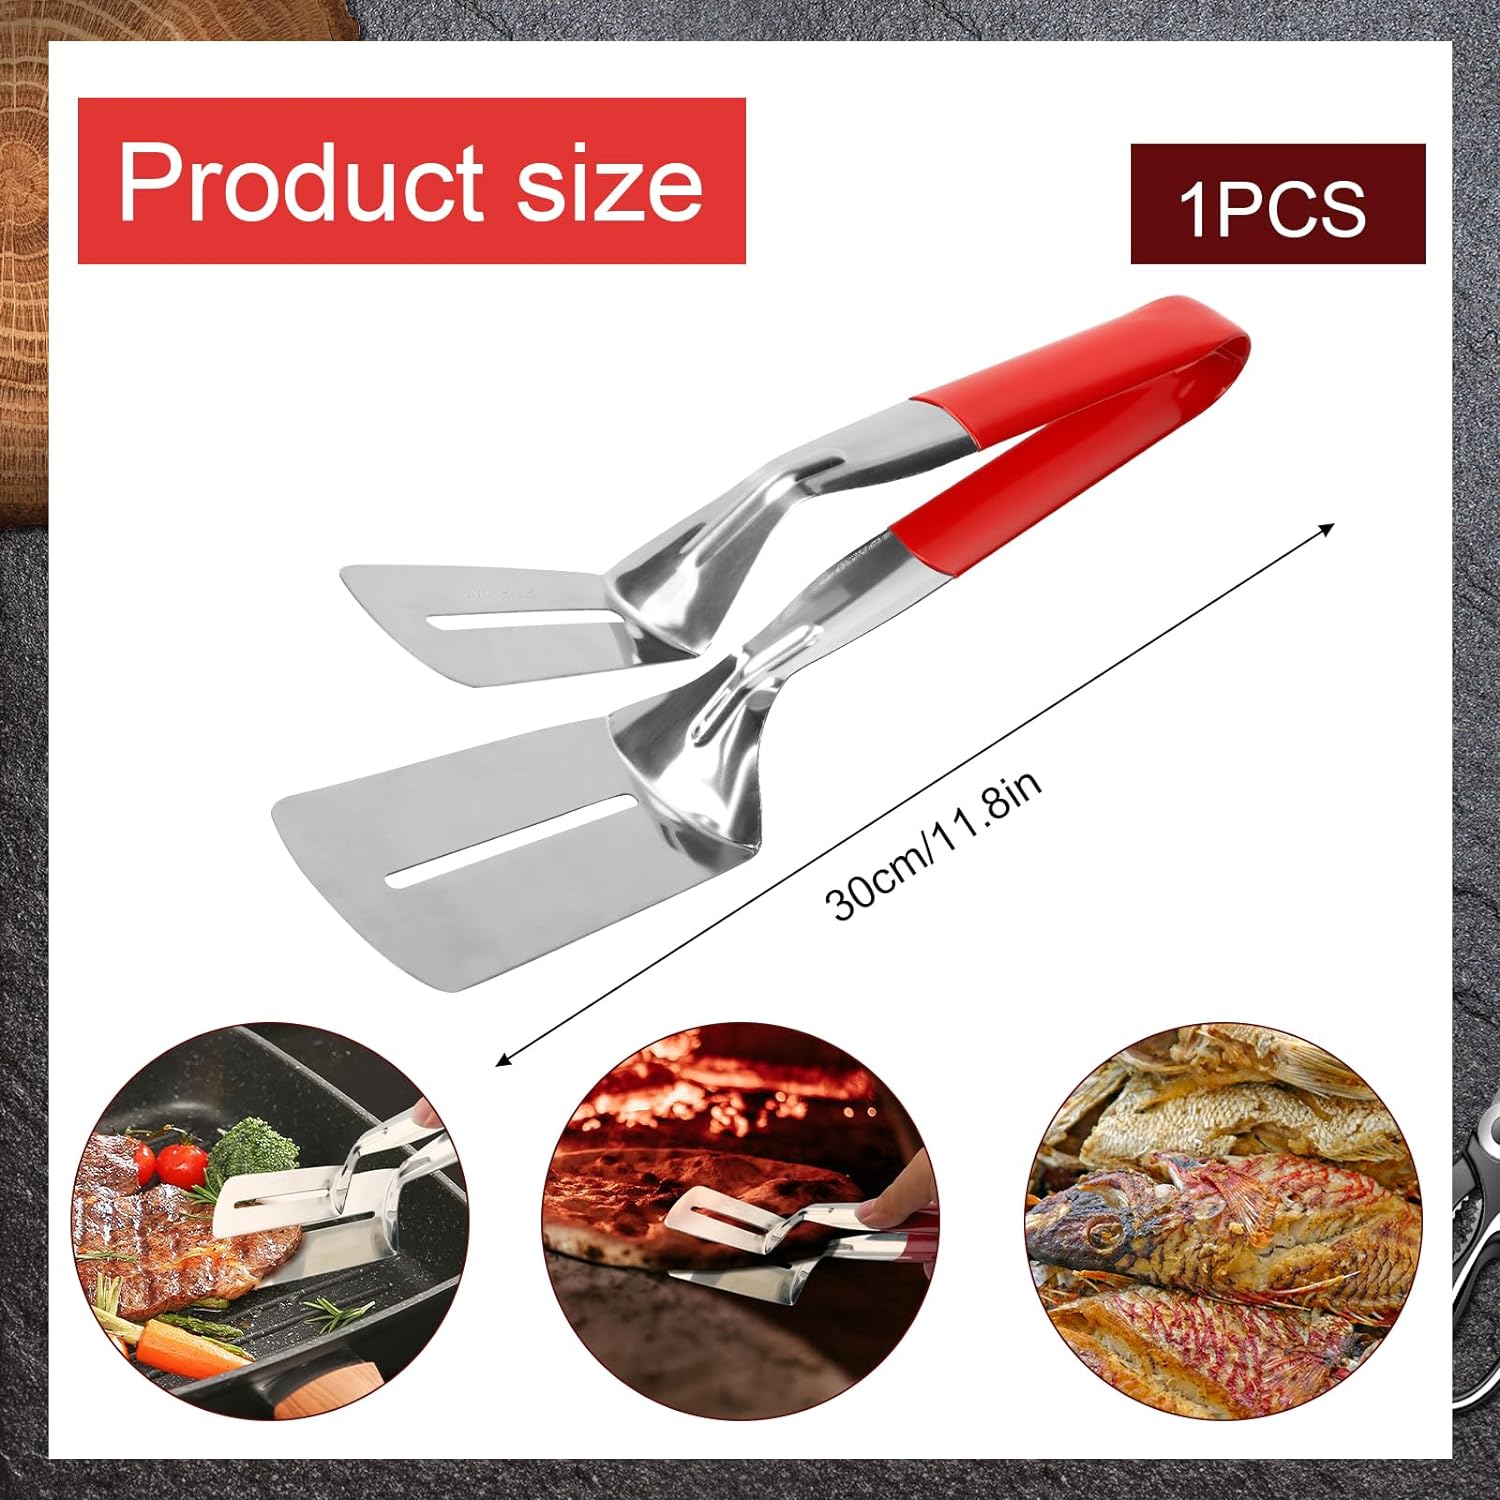 Anti-Scald Extended Handle Spatula Tongs, Multifunctional Kitchen Stainless Steel Barbecue Clamp Accurate Stainless Steel Grill Clamp for Food Cooking Steak Fish Bread Hamburger BBQ